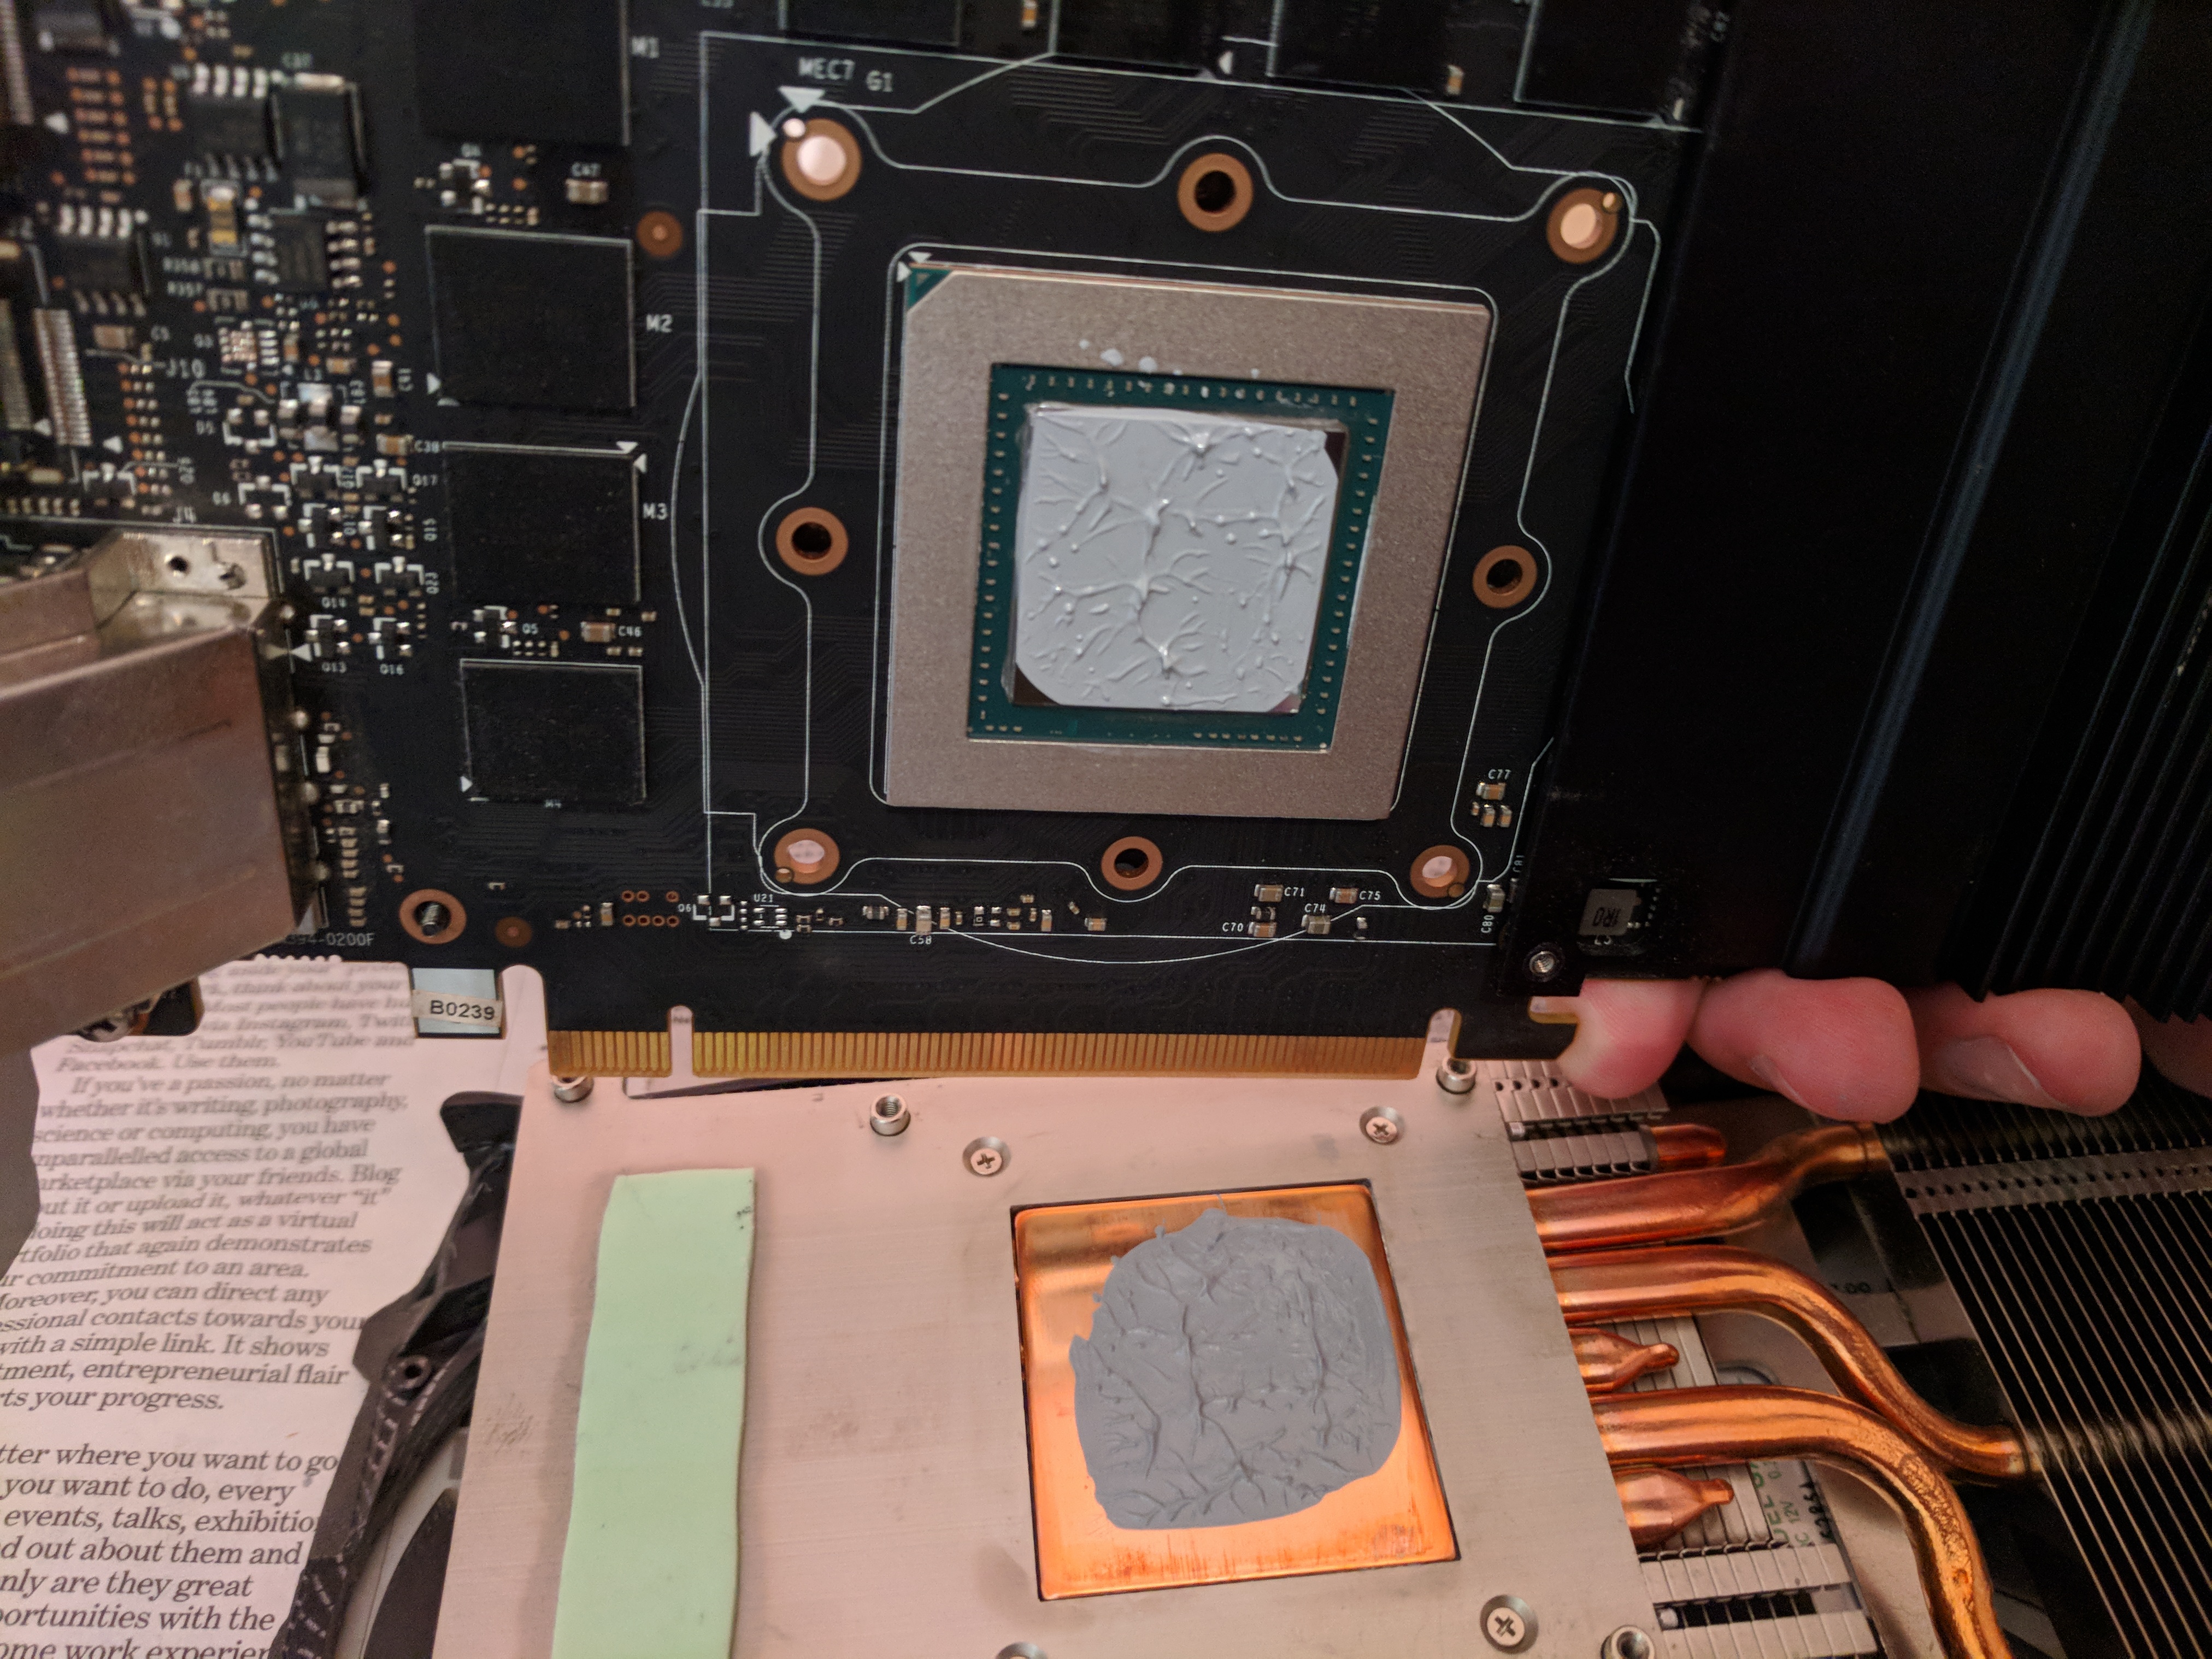 kæmpe stor rådgive vision Is this too much thermal paste? On a GPU - Troubleshooting - Linus Tech Tips